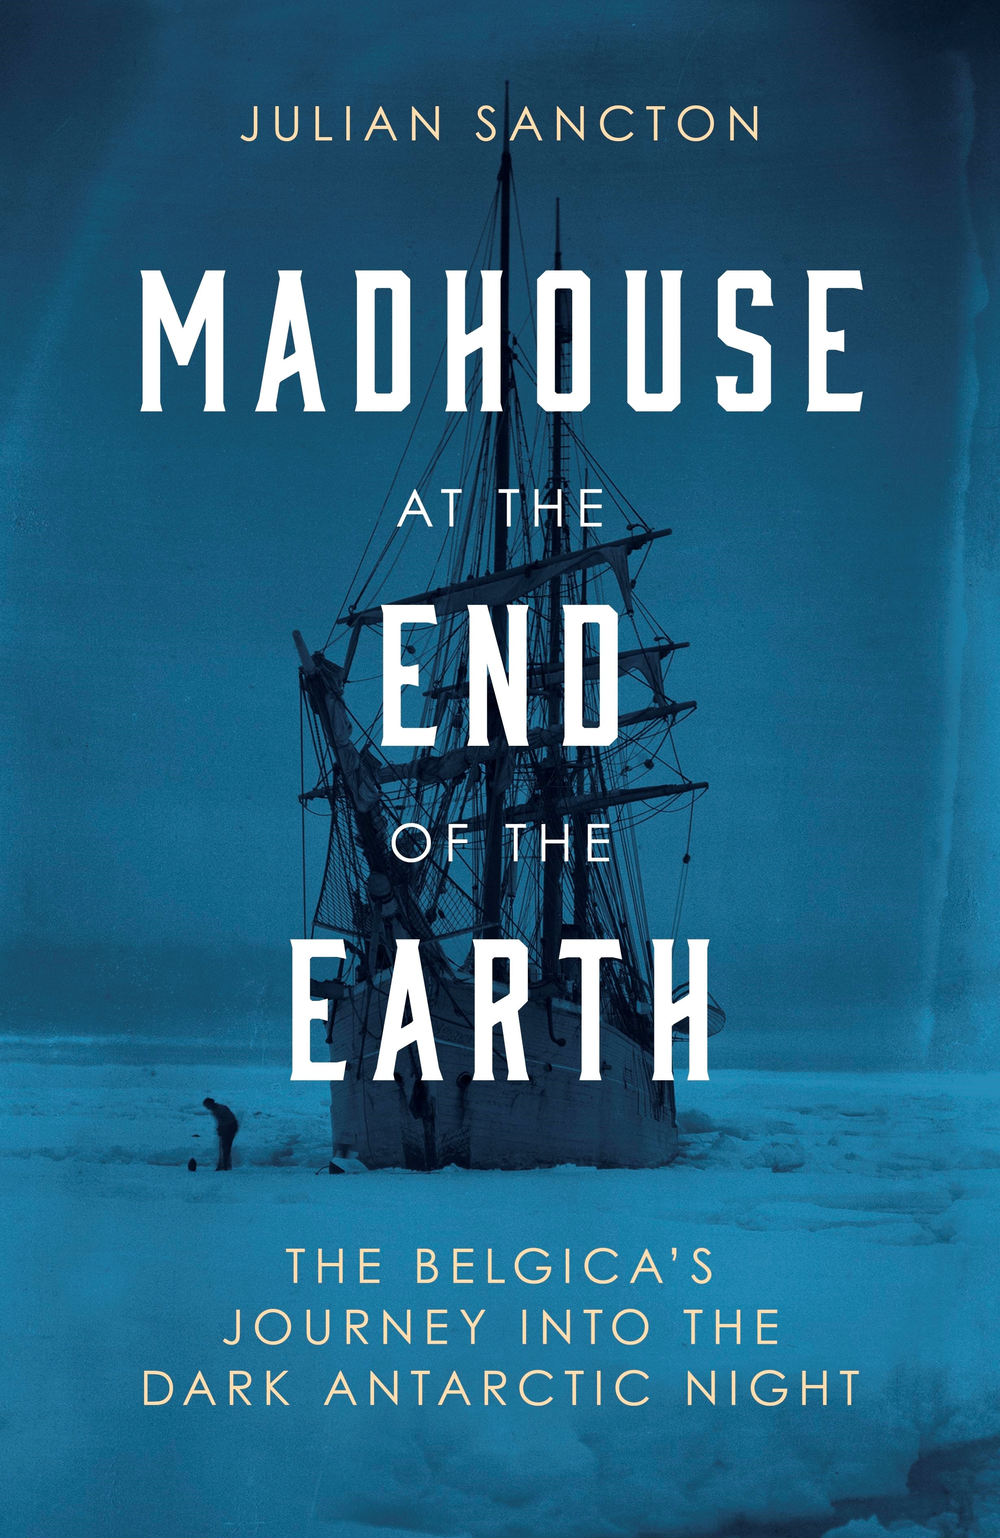 madhouse at the end of earth